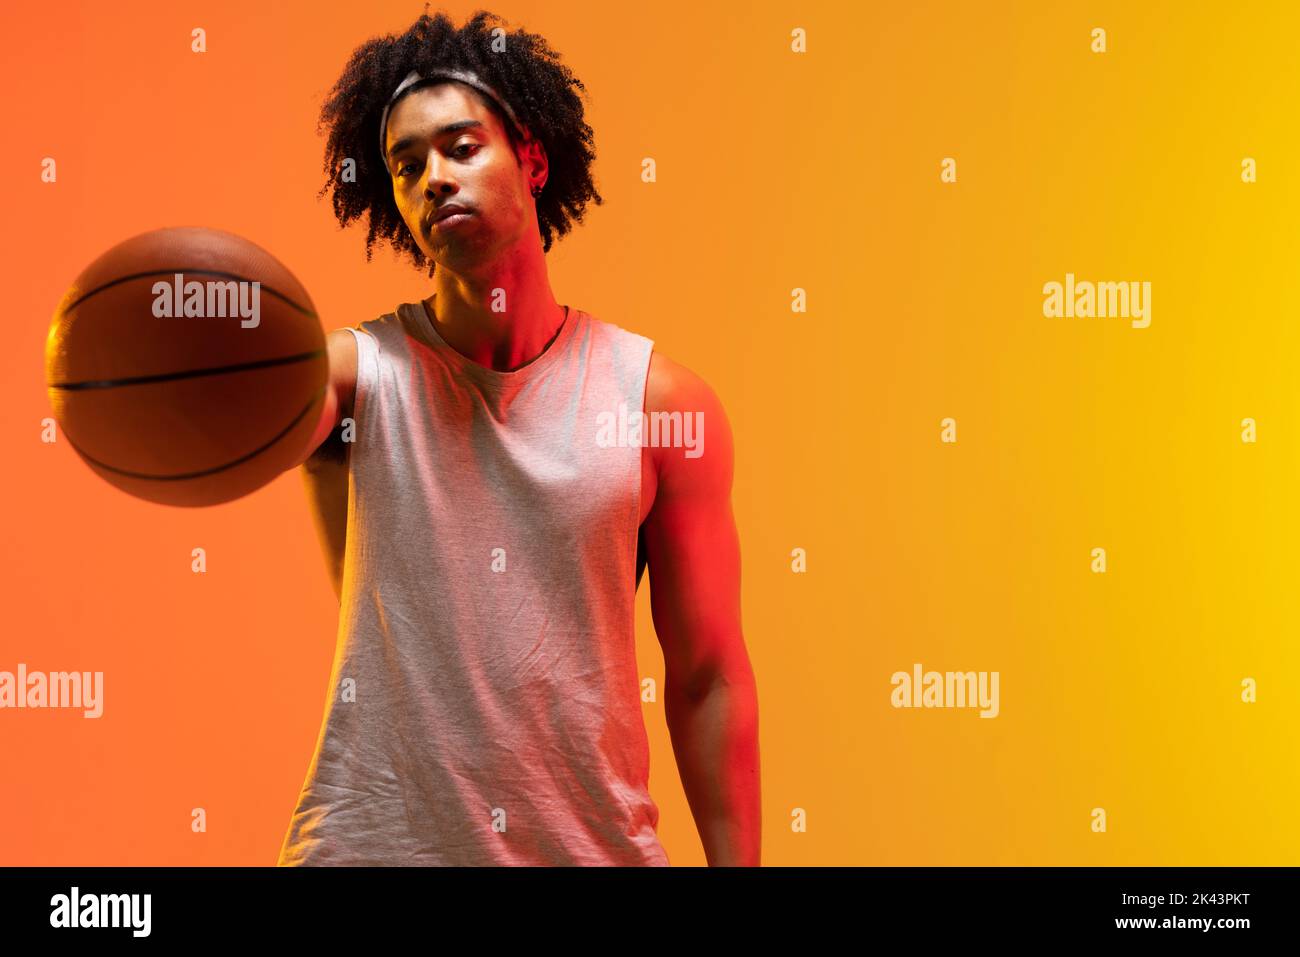 Image of biracial basketball player with basketball on orange to yellow background. Sports and competition concept. Stock Photo